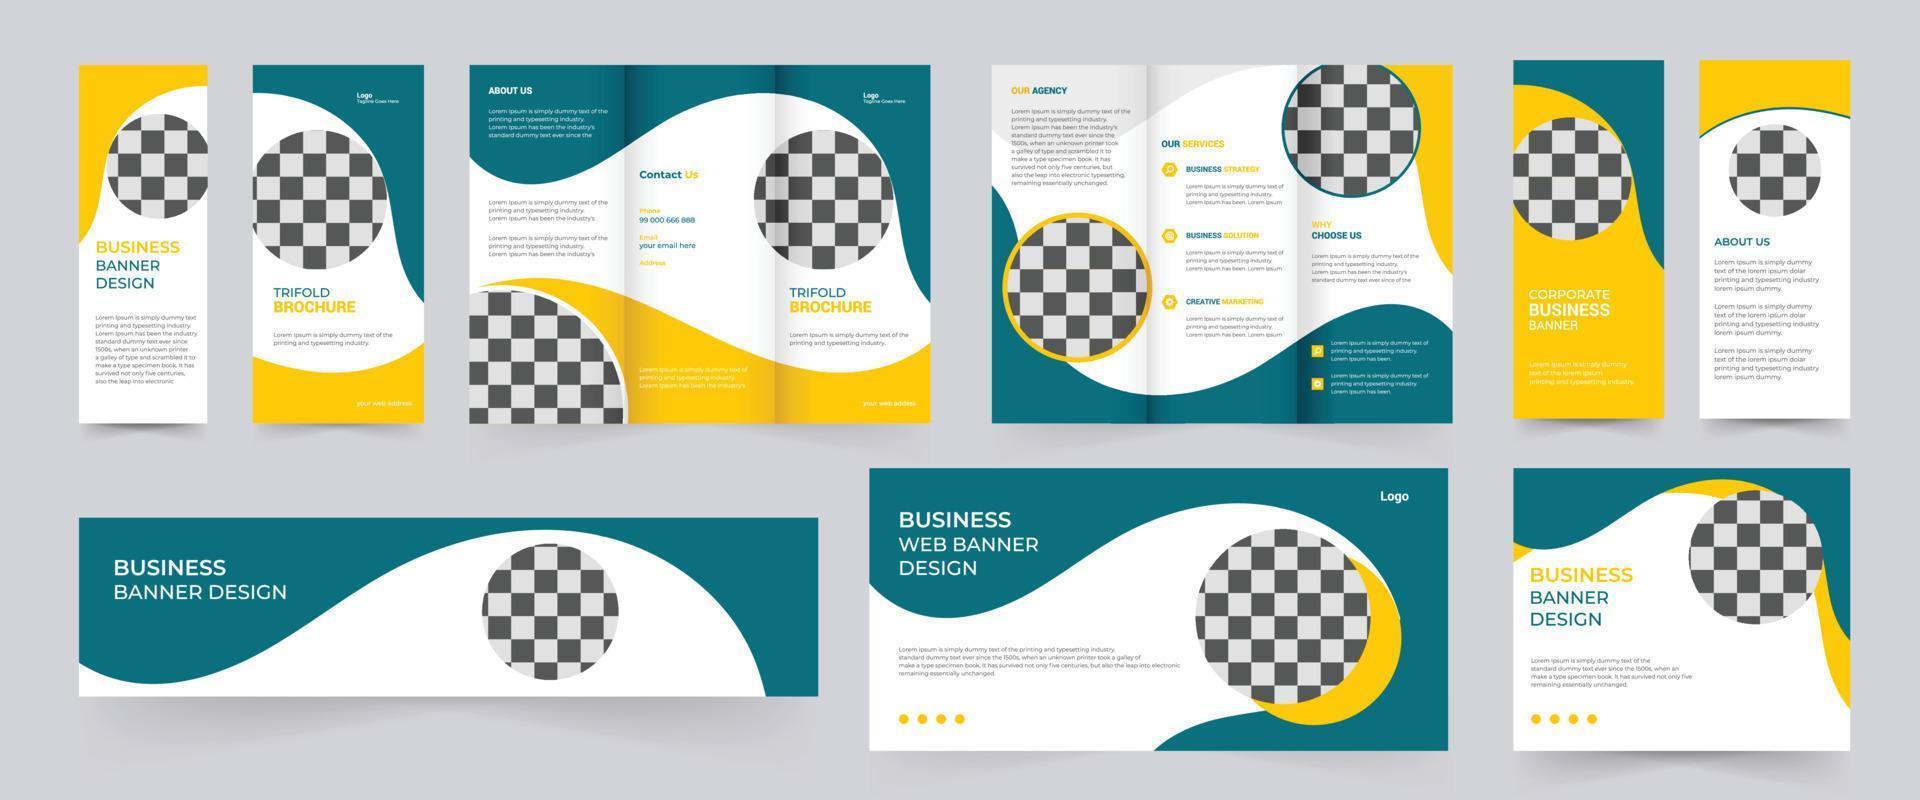 Creative and corporate business trifold brochure design template with minimalist promotion layout. use for business catalog, leaflet, trifold flyer, web banner, annual report and brochure design. vector